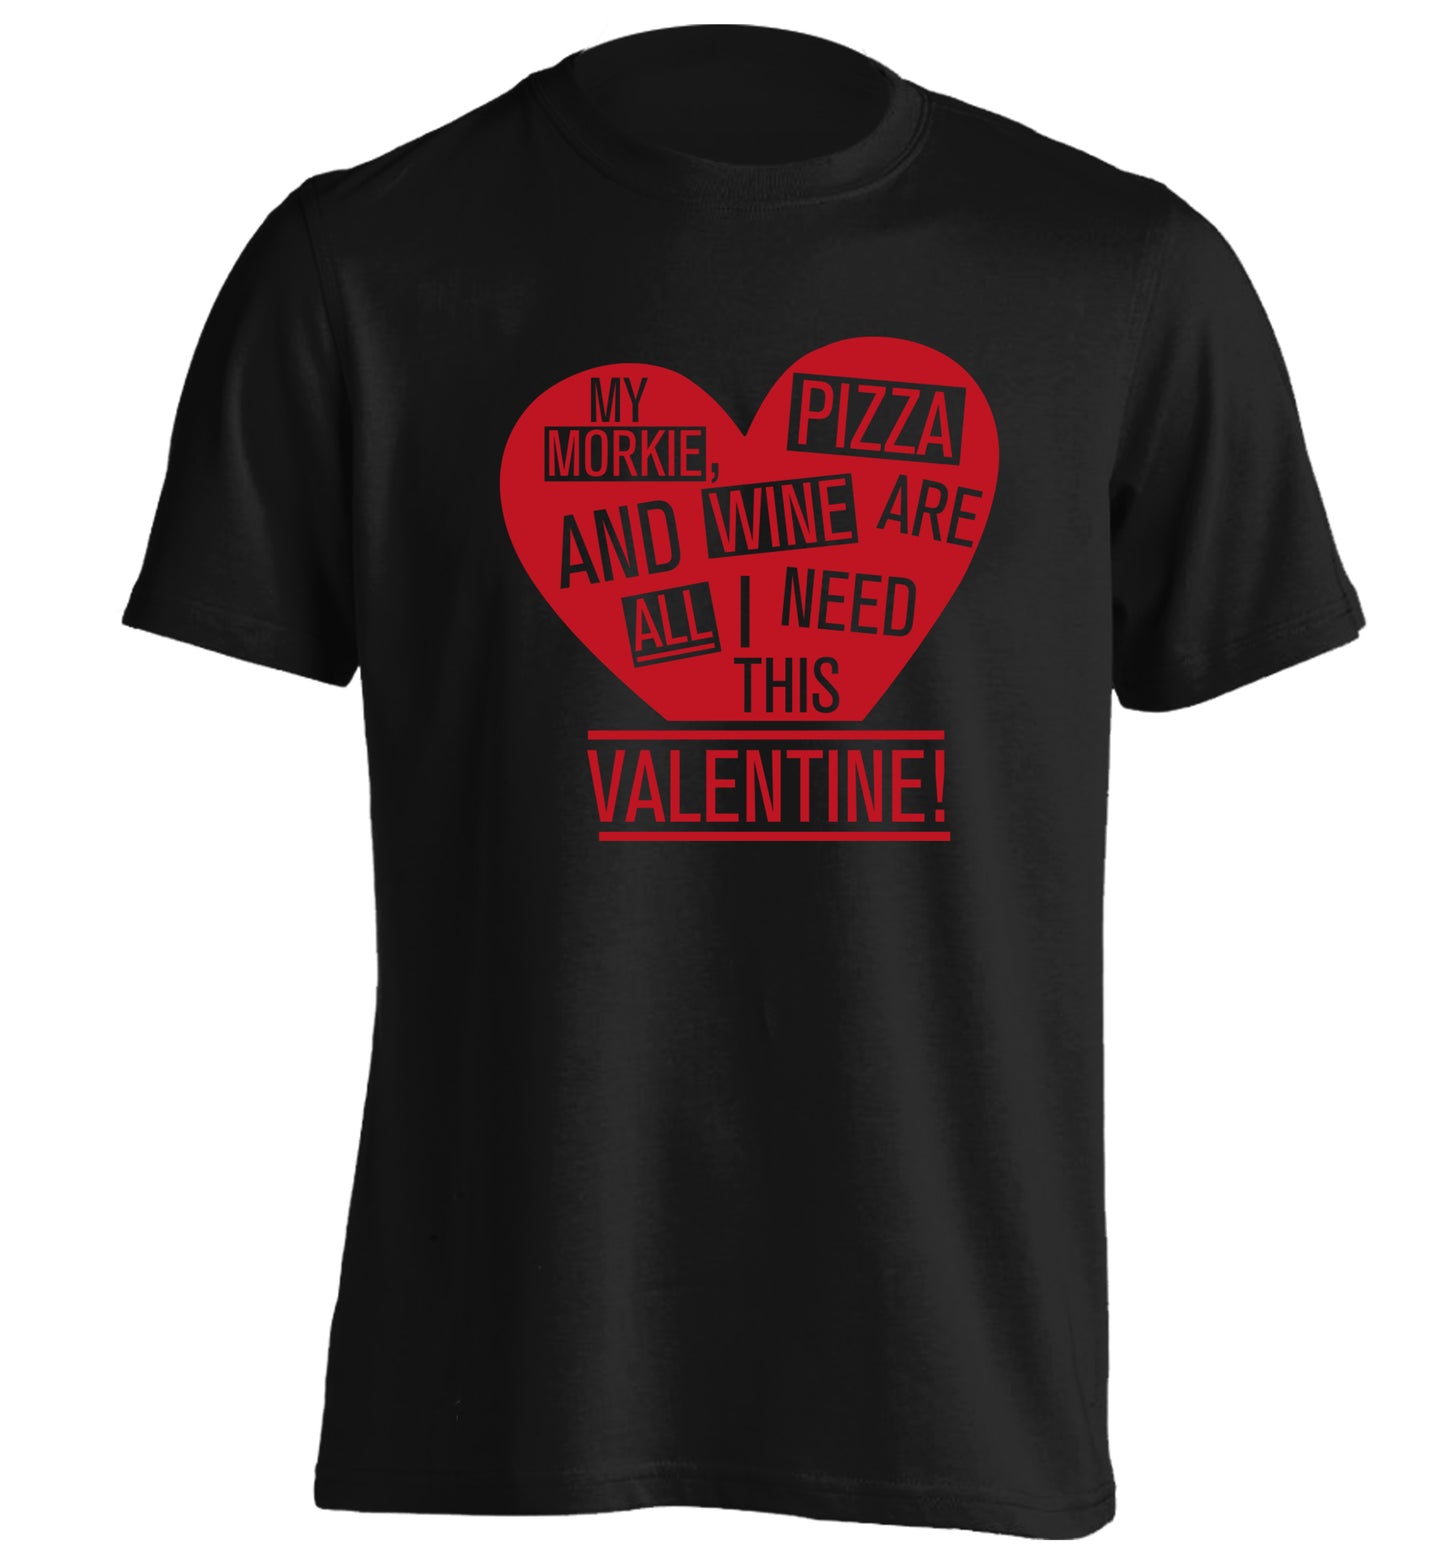 My morkie, pizza and wine are all I need this valentine! adults unisex black Tshirt 2XL